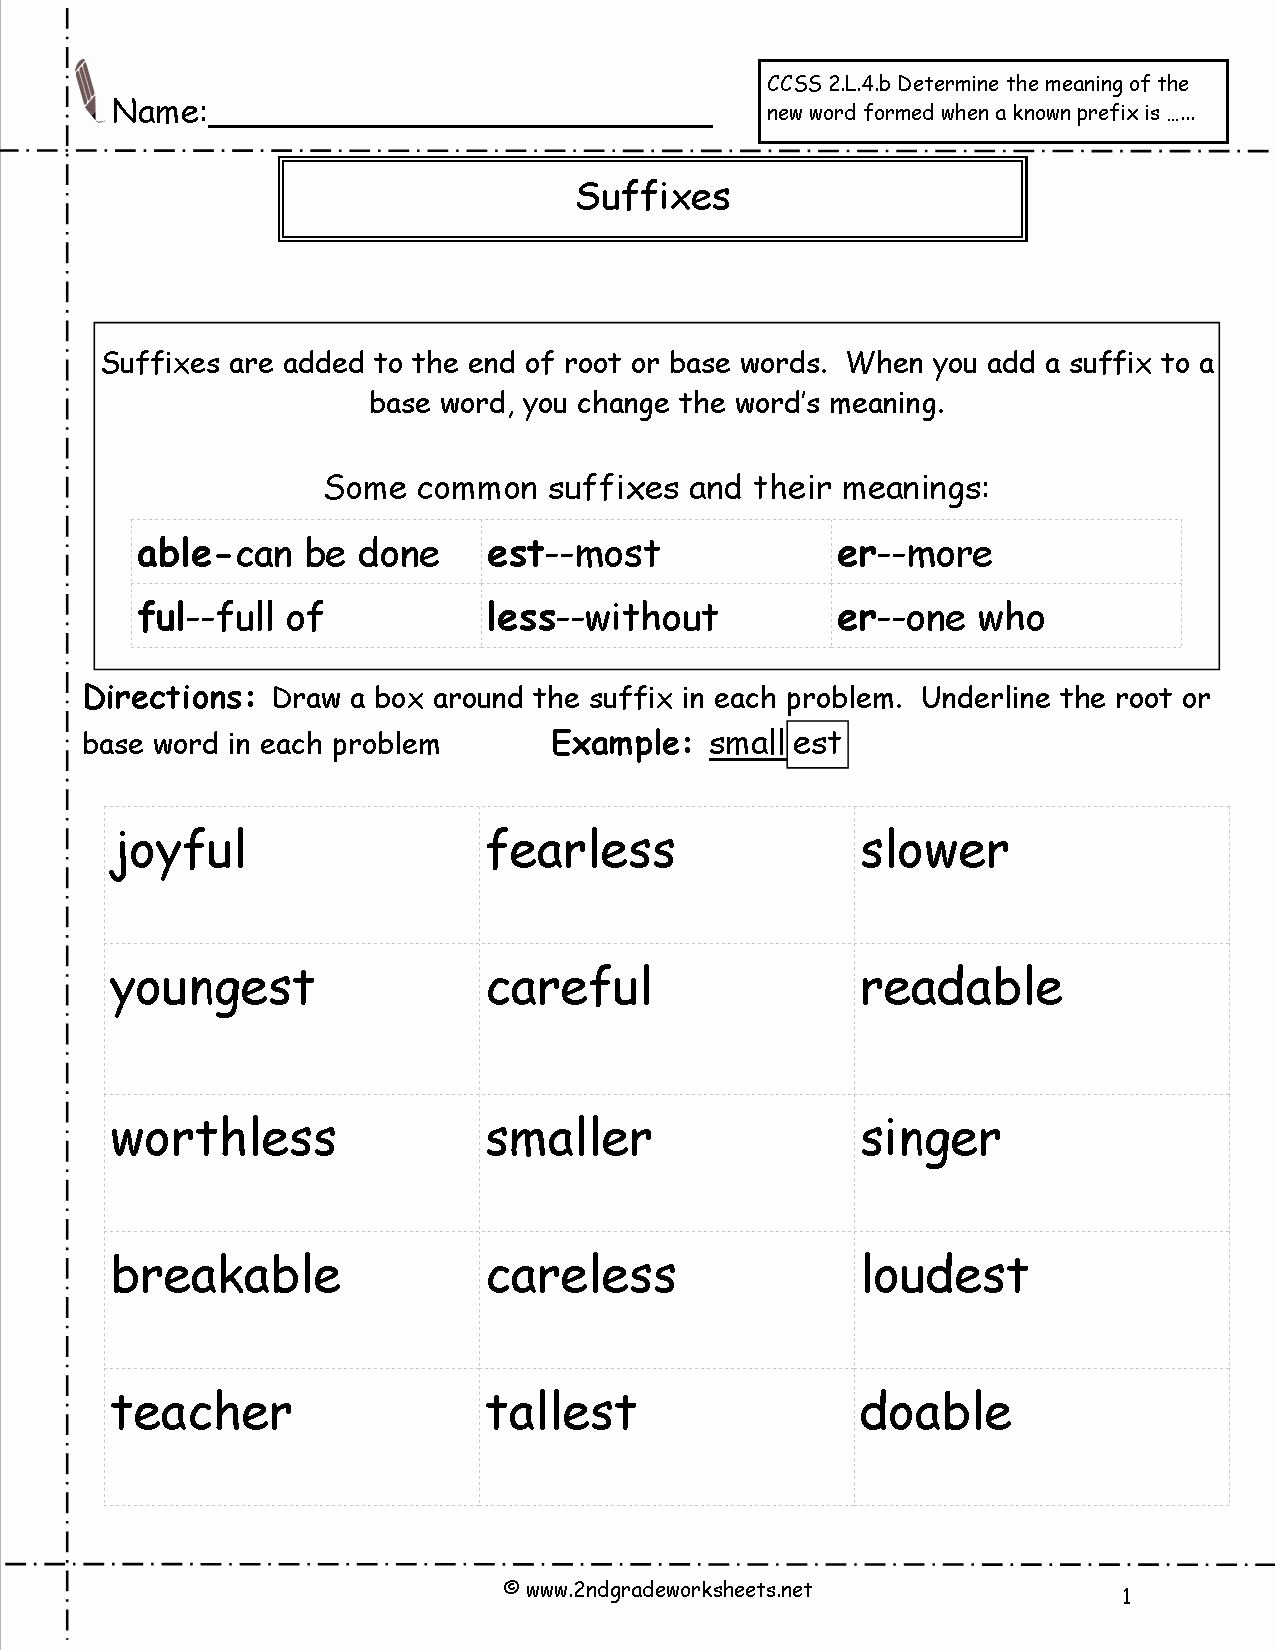 Suffix Worksheets for 4th Grade Luxury 10 Best Of Root Words 4th Grade Worksheets Prefix